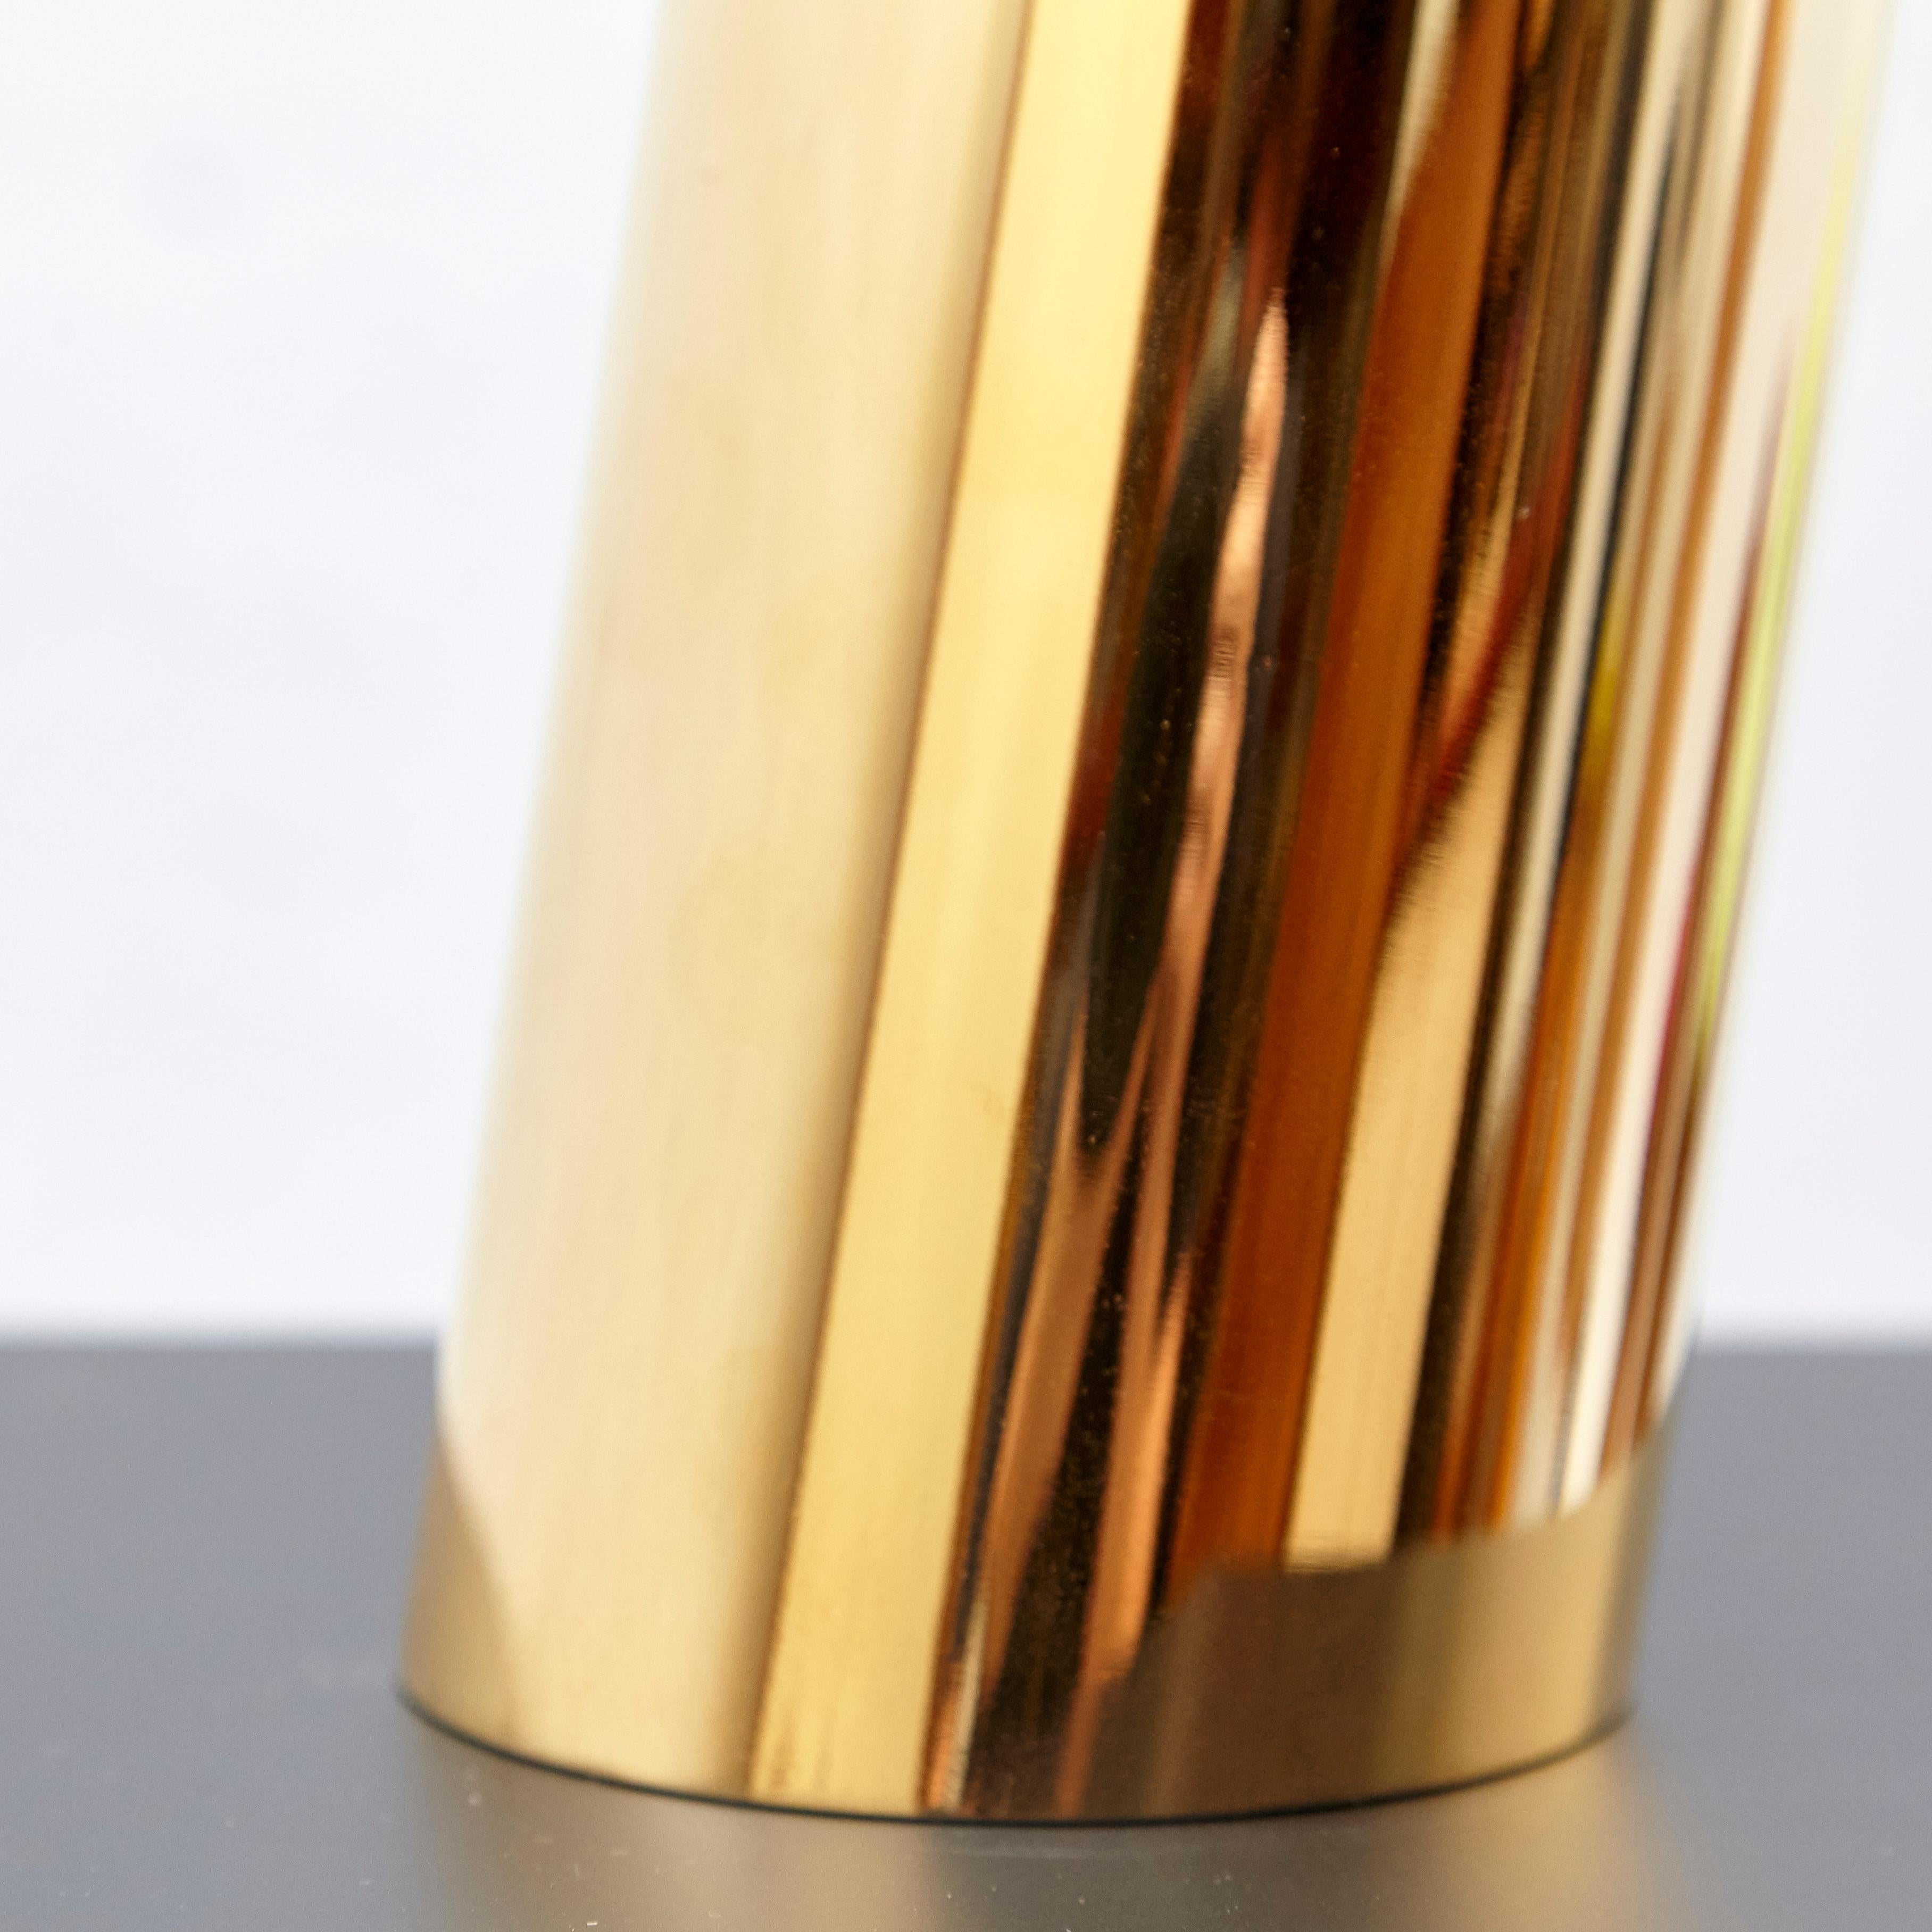 Brass Ettore Sottsass N Limited Edition Vase in Wood and Murano Glass for Flowers